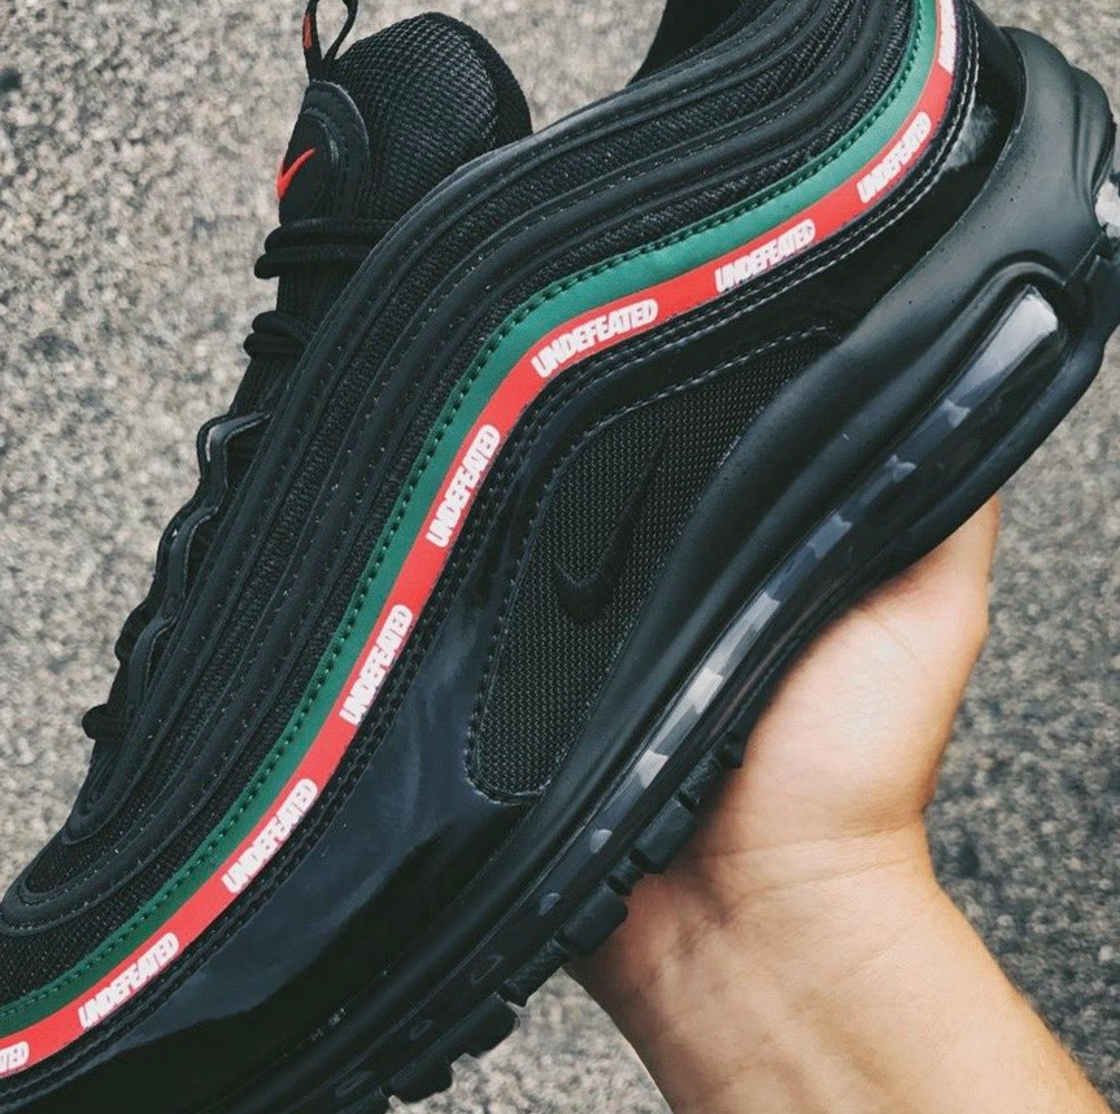 An UNDEFEATED x Nike Air Max 97 